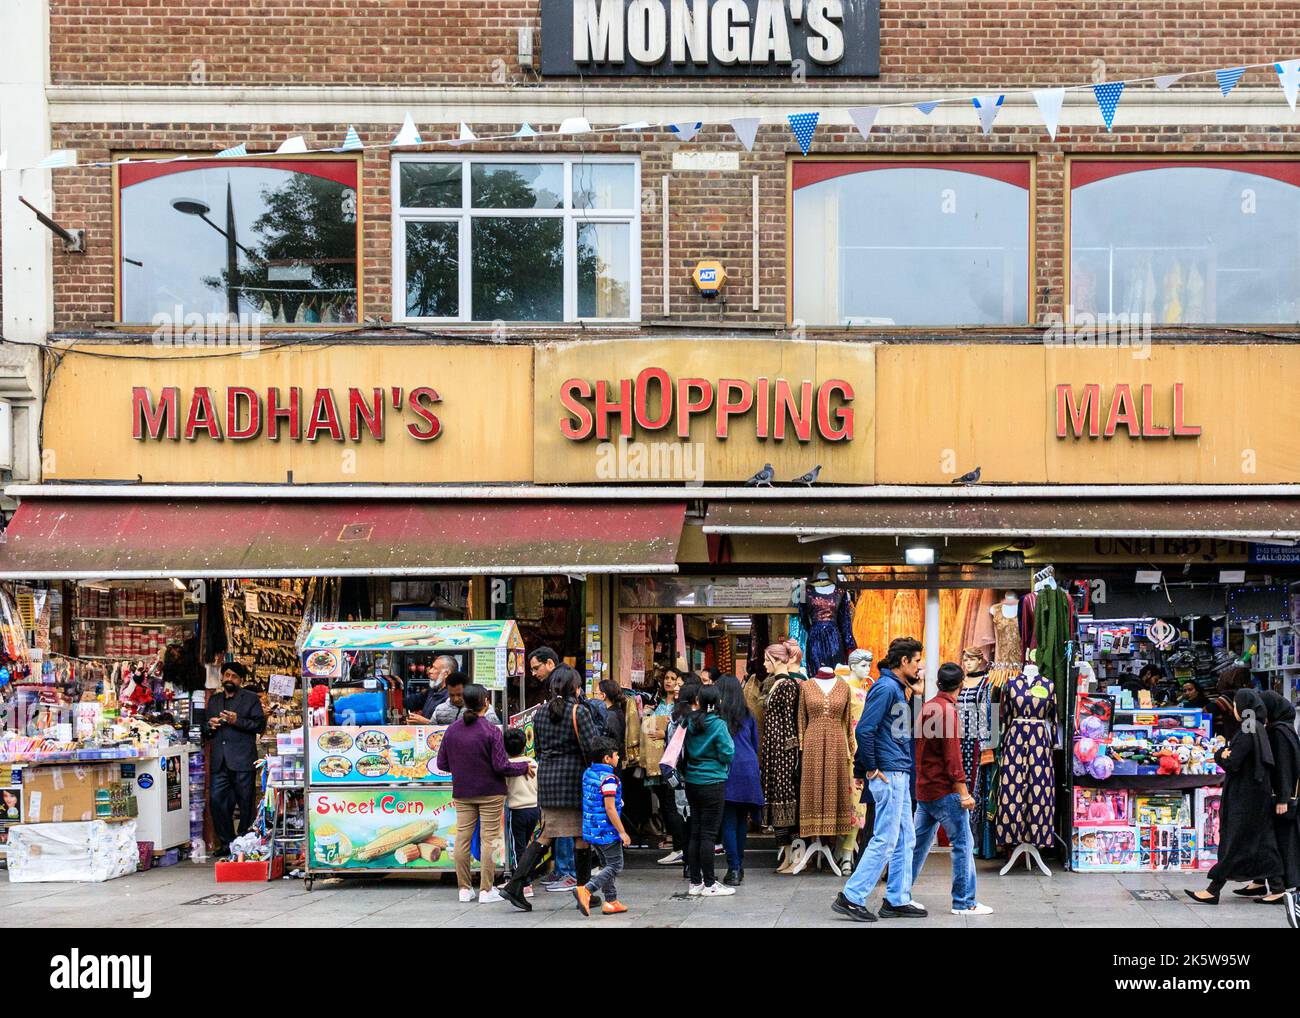 Madhan's Shopping Mall stores, Asian shops and people shopping in Southall High Street, Southall, West London, England, UK Stock Photo